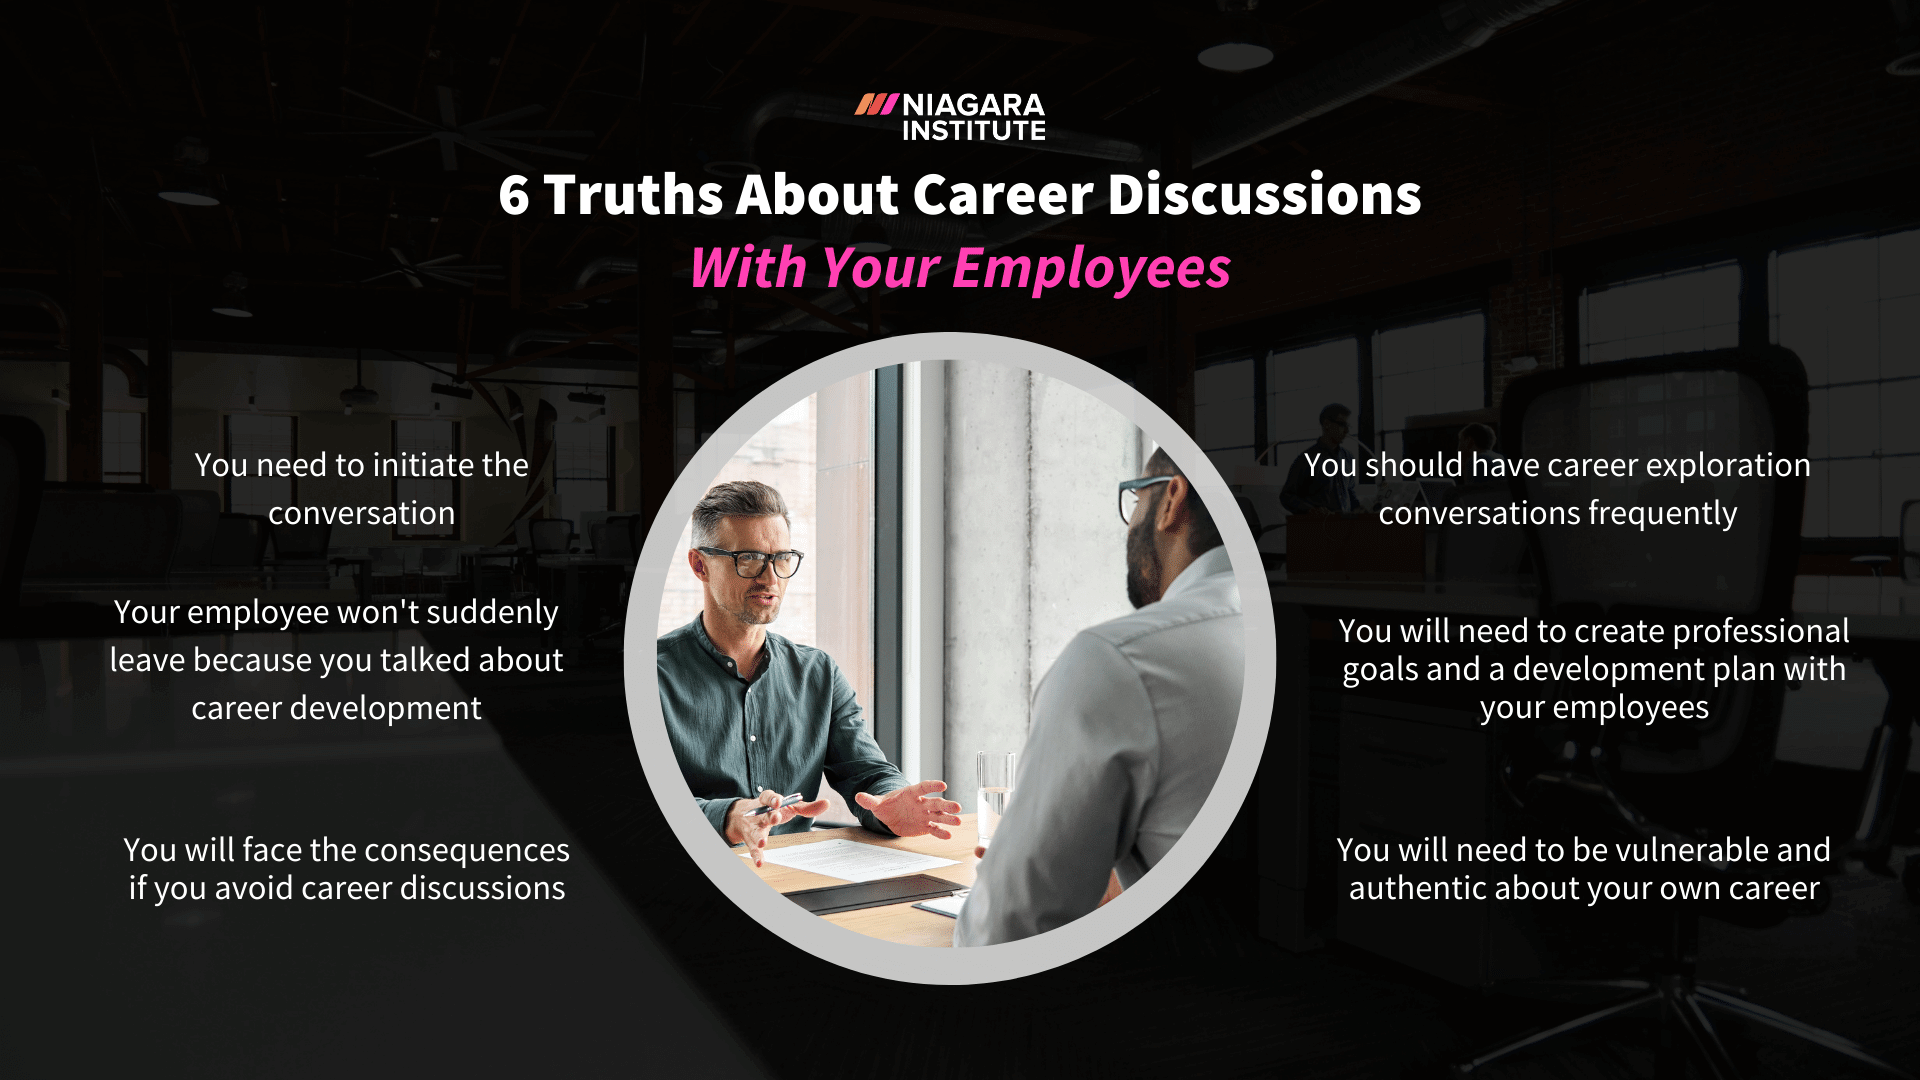 6 Truths About Career Discussion With Your Employees  (1)